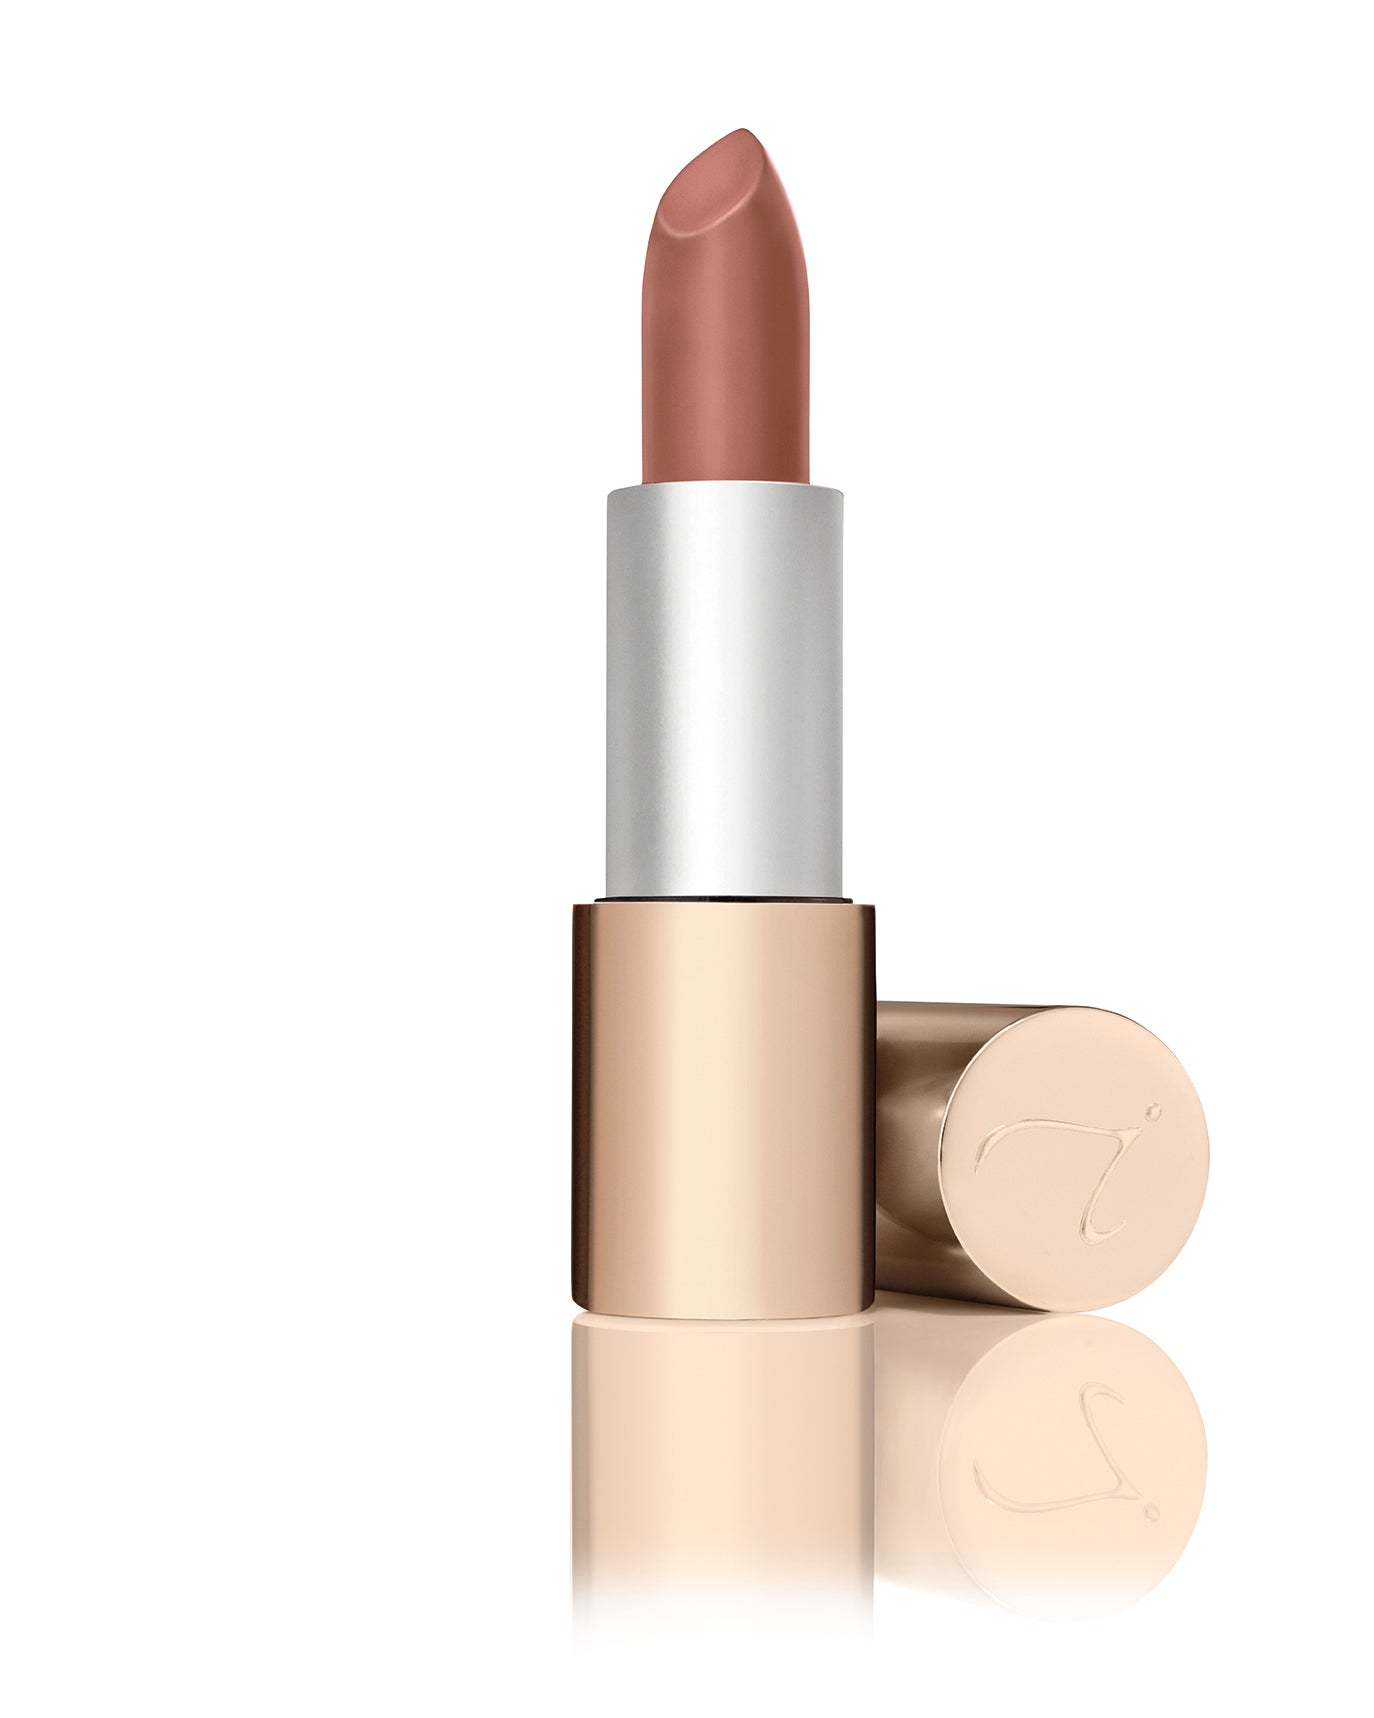 Load image into Gallery viewer, Jane Iredale Triple Luxe Long Lasting Naturally Moist Lipstick | Vegan Makeup | Cruelty Free | Clean Beauty | Ethical Makeup | Natural Ingredients
